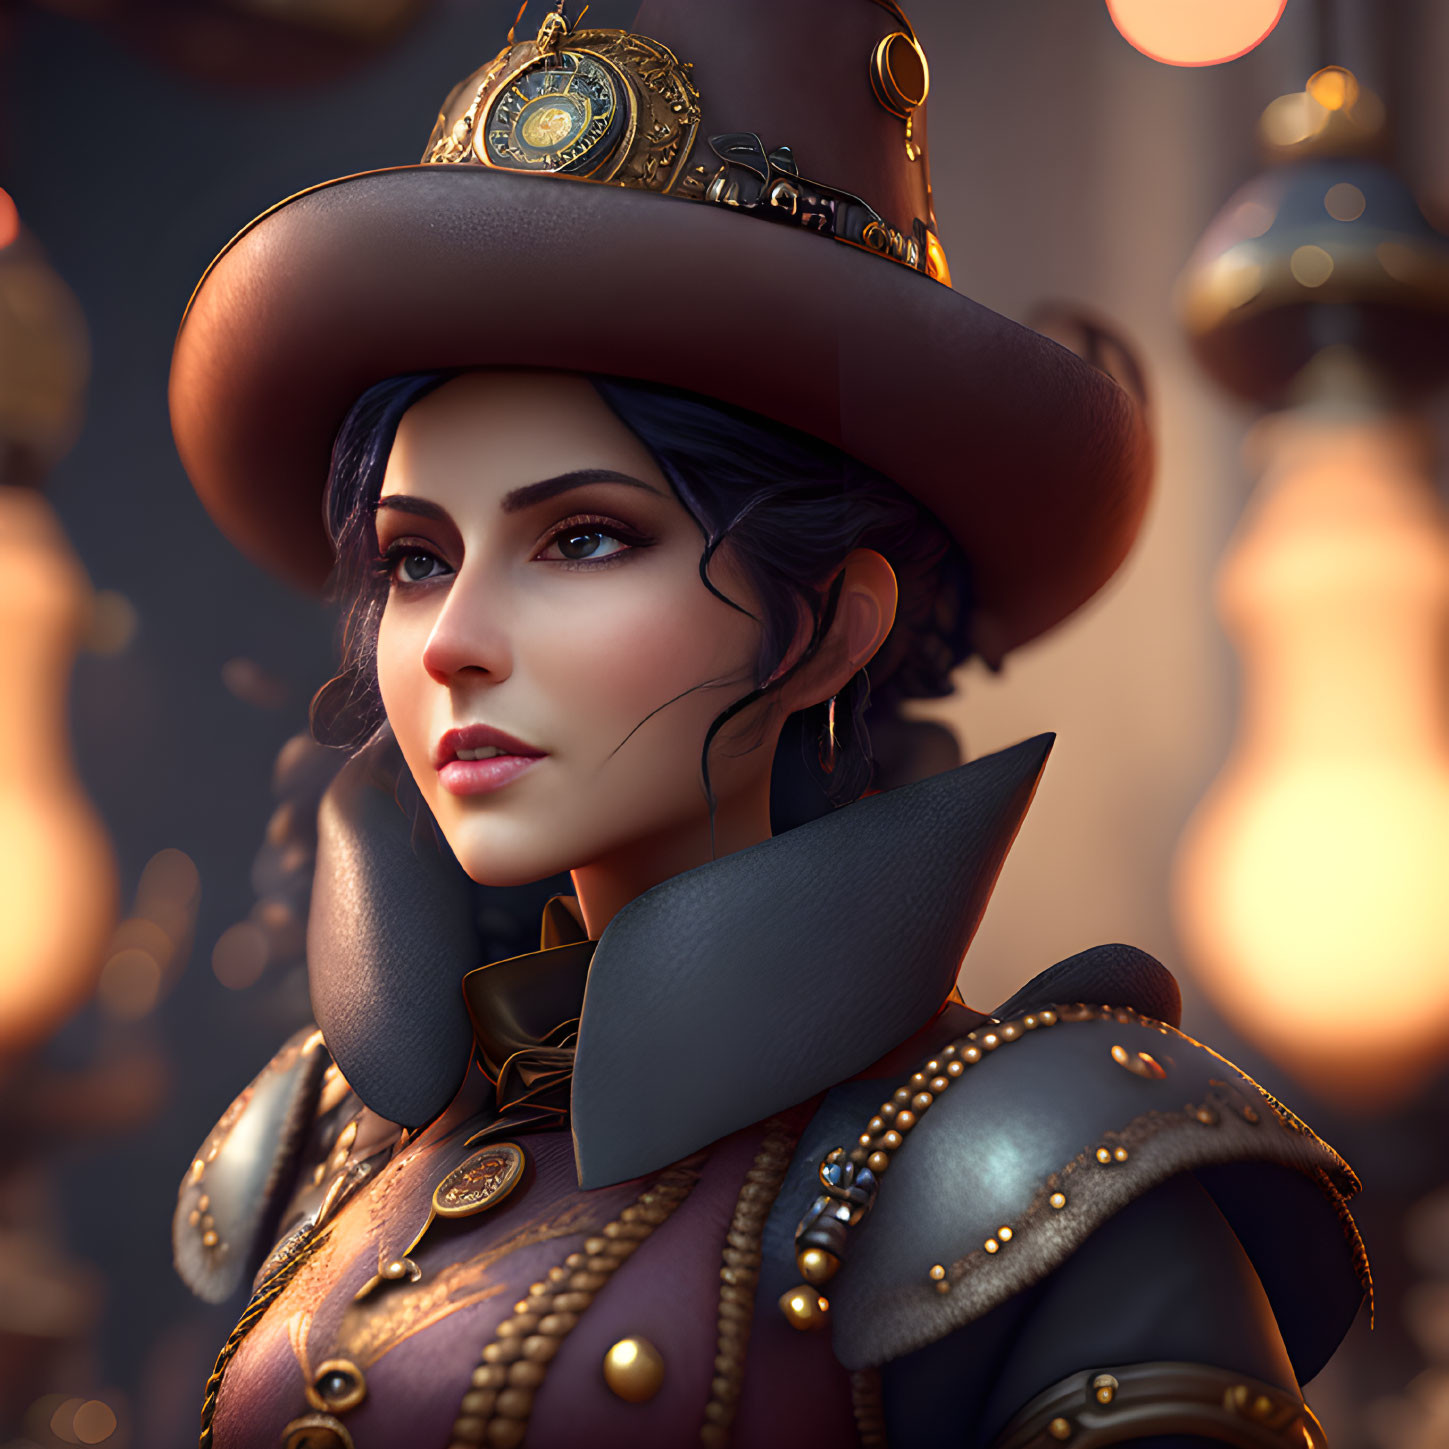 Digital portrait of a woman in steampunk attire with gears and clock pieces on wide-brimmed